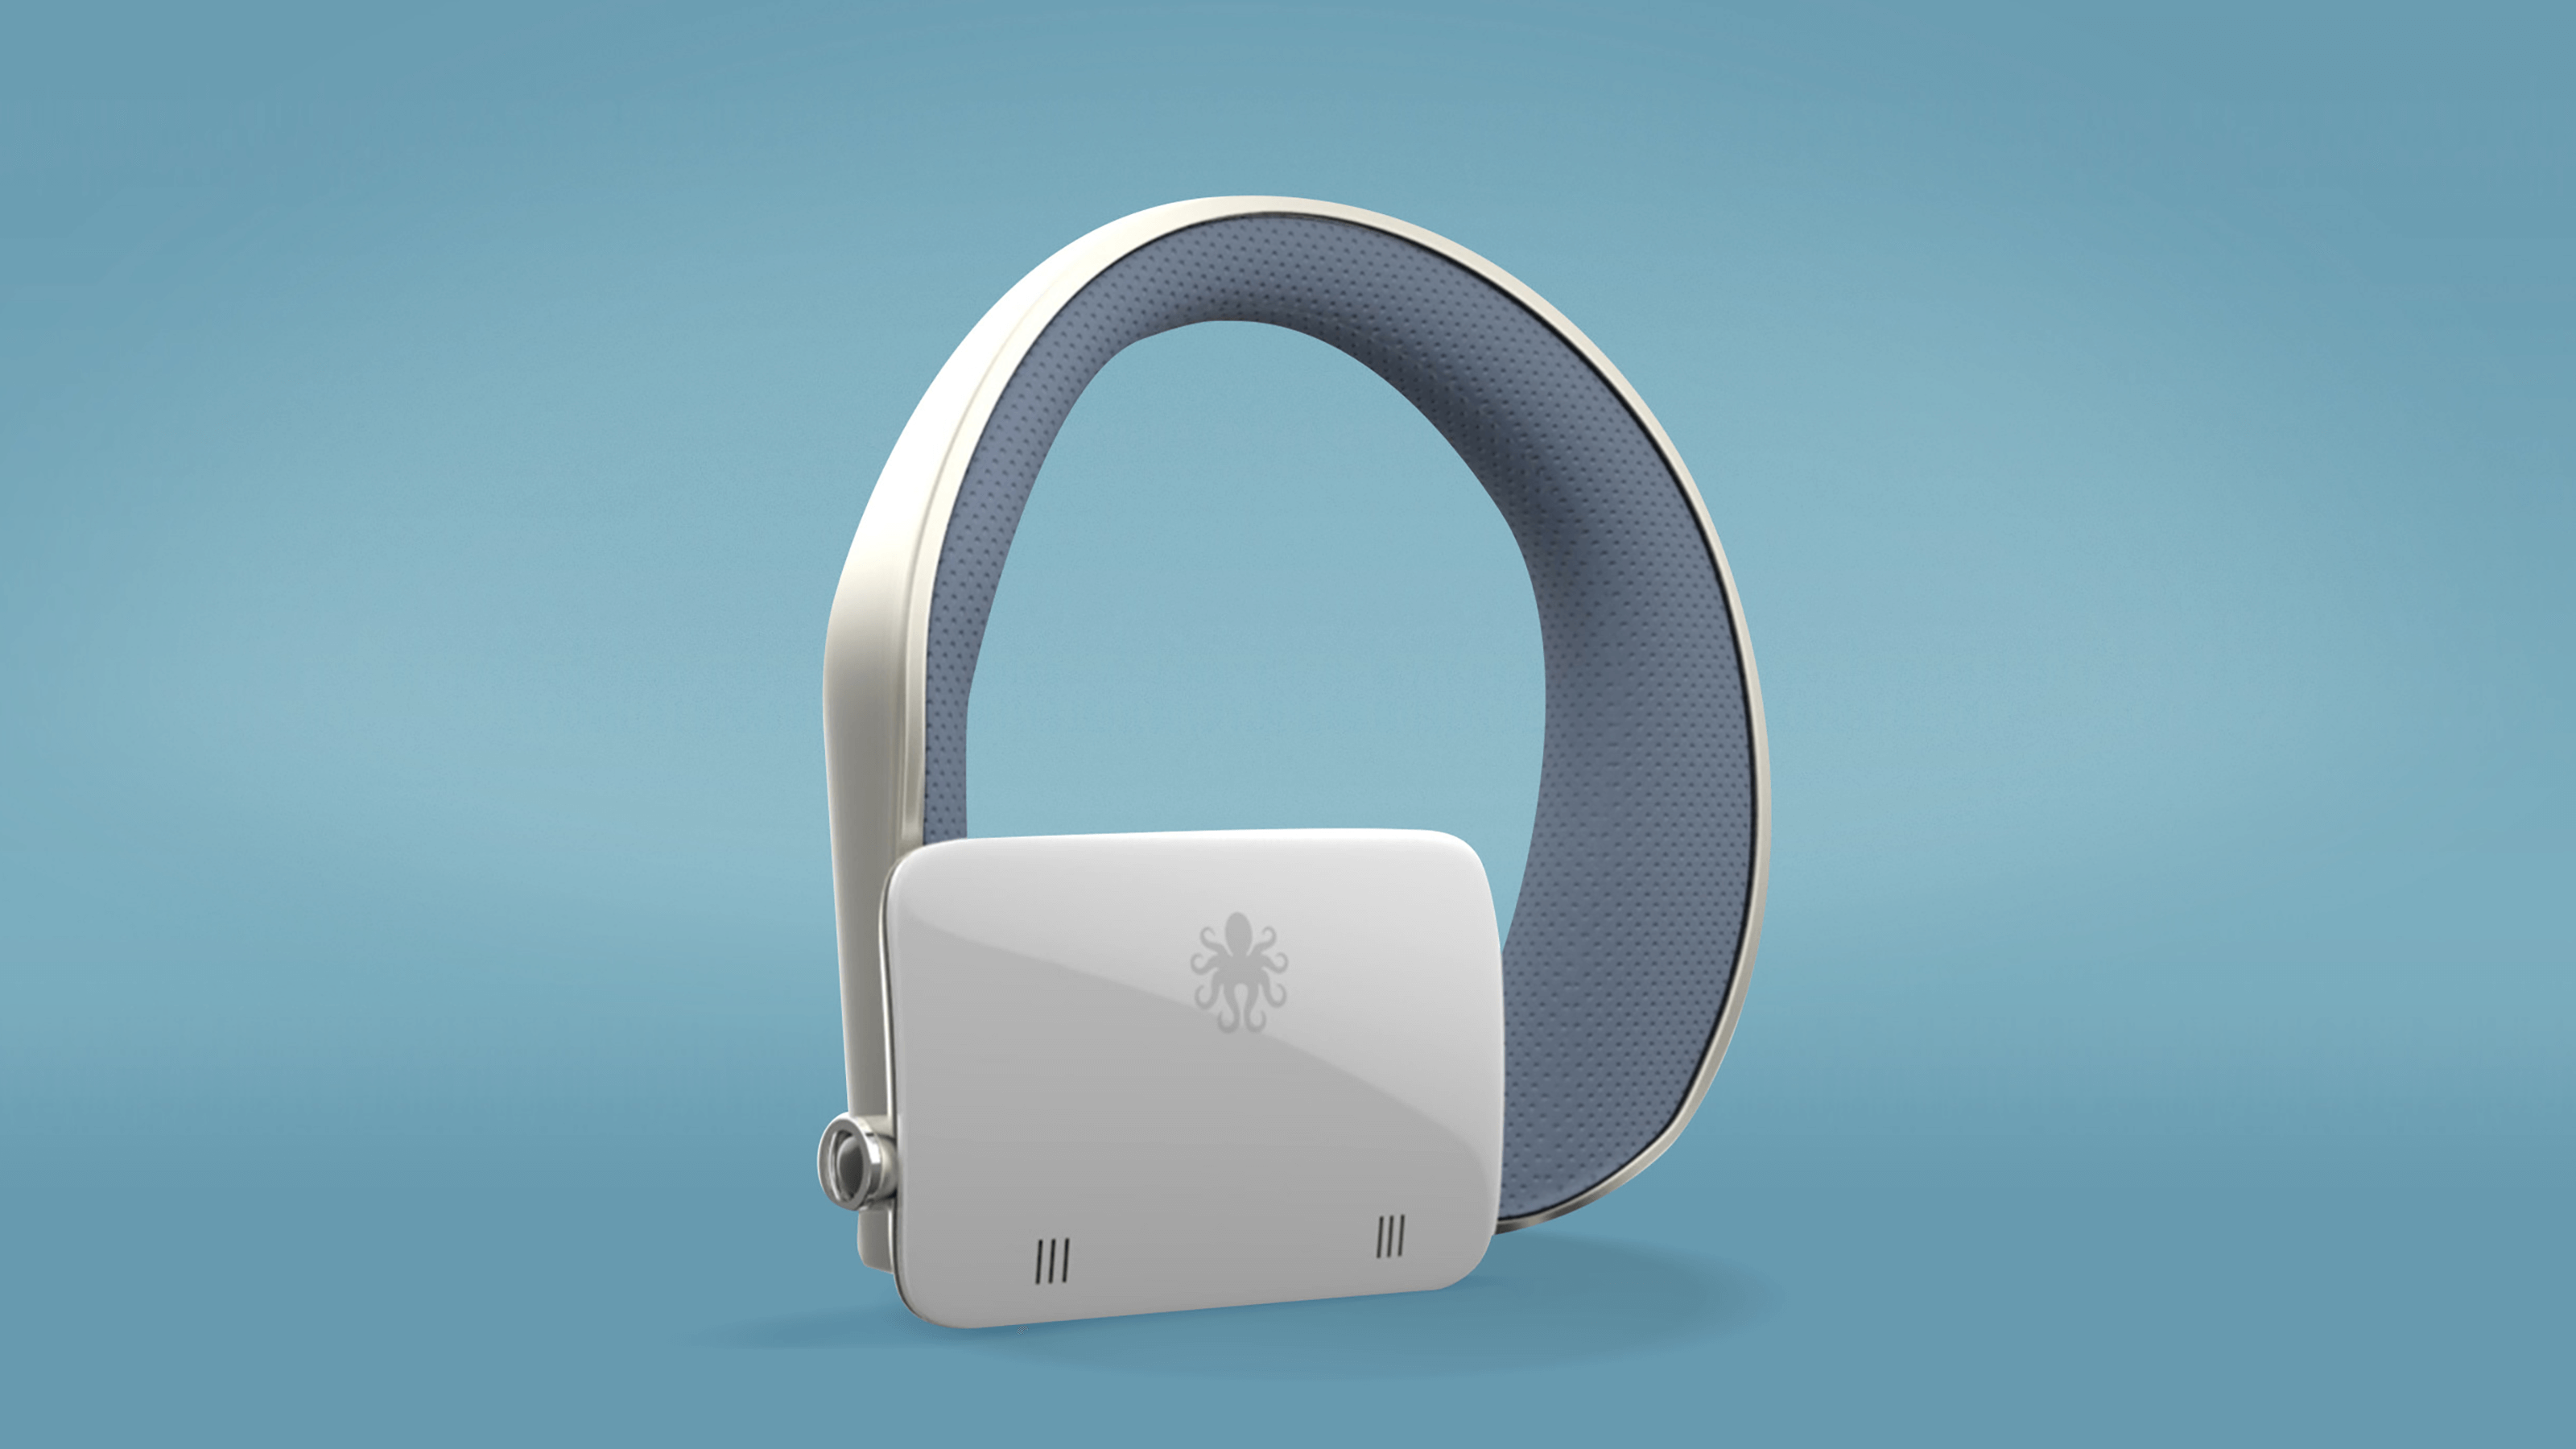 A rendering of LaLaLa wearable device concept